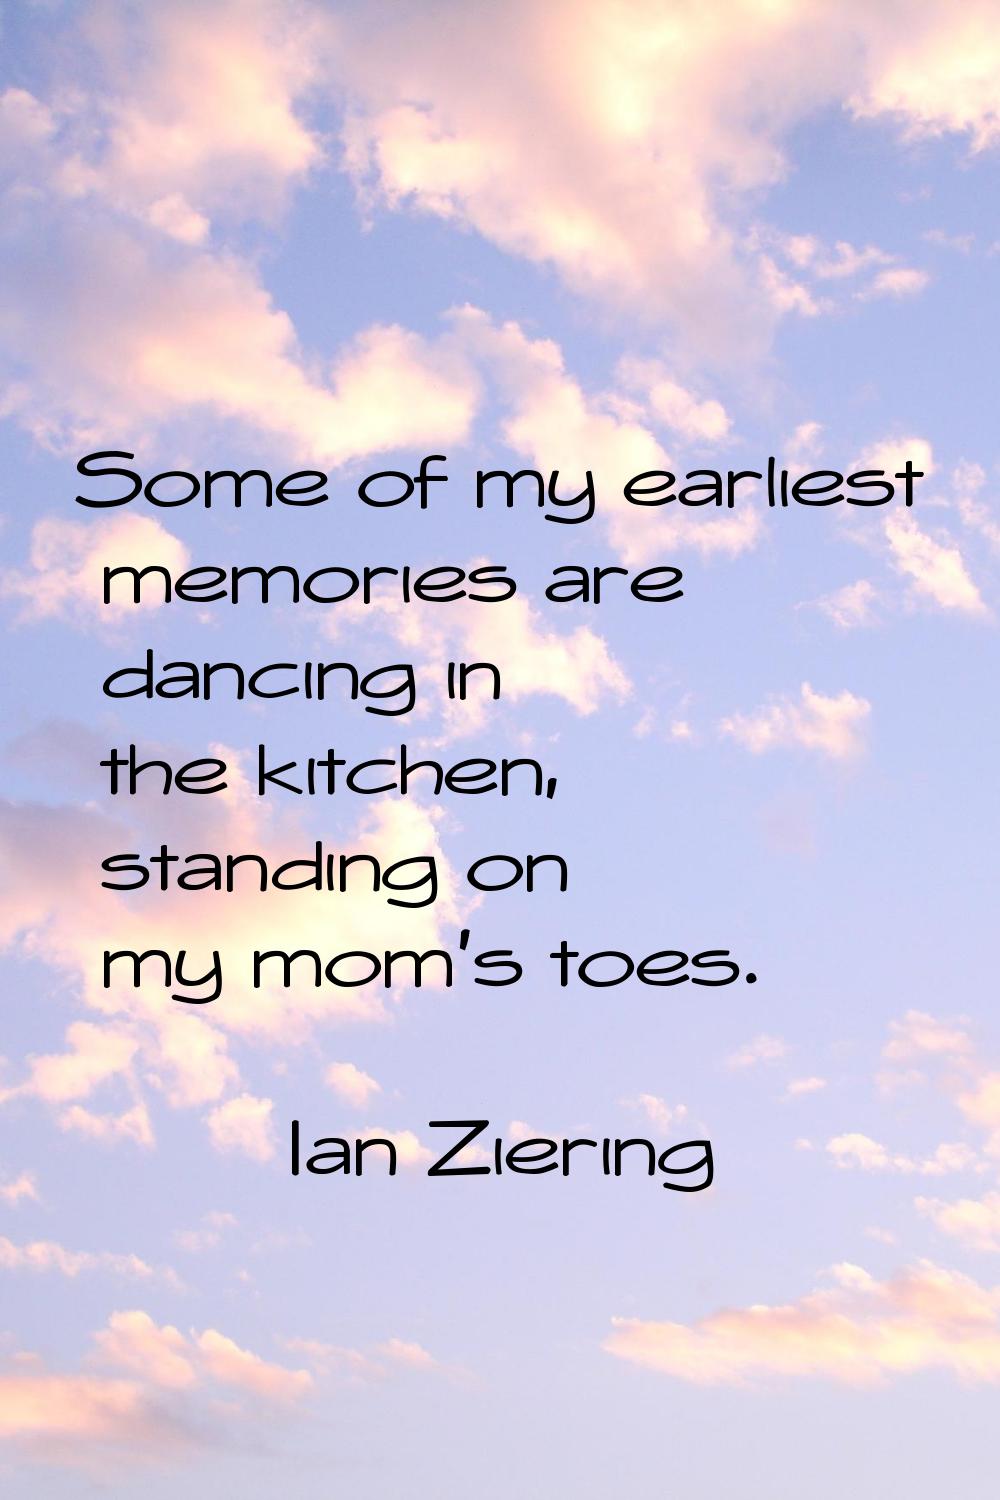 Some of my earliest memories are dancing in the kitchen, standing on my mom's toes.